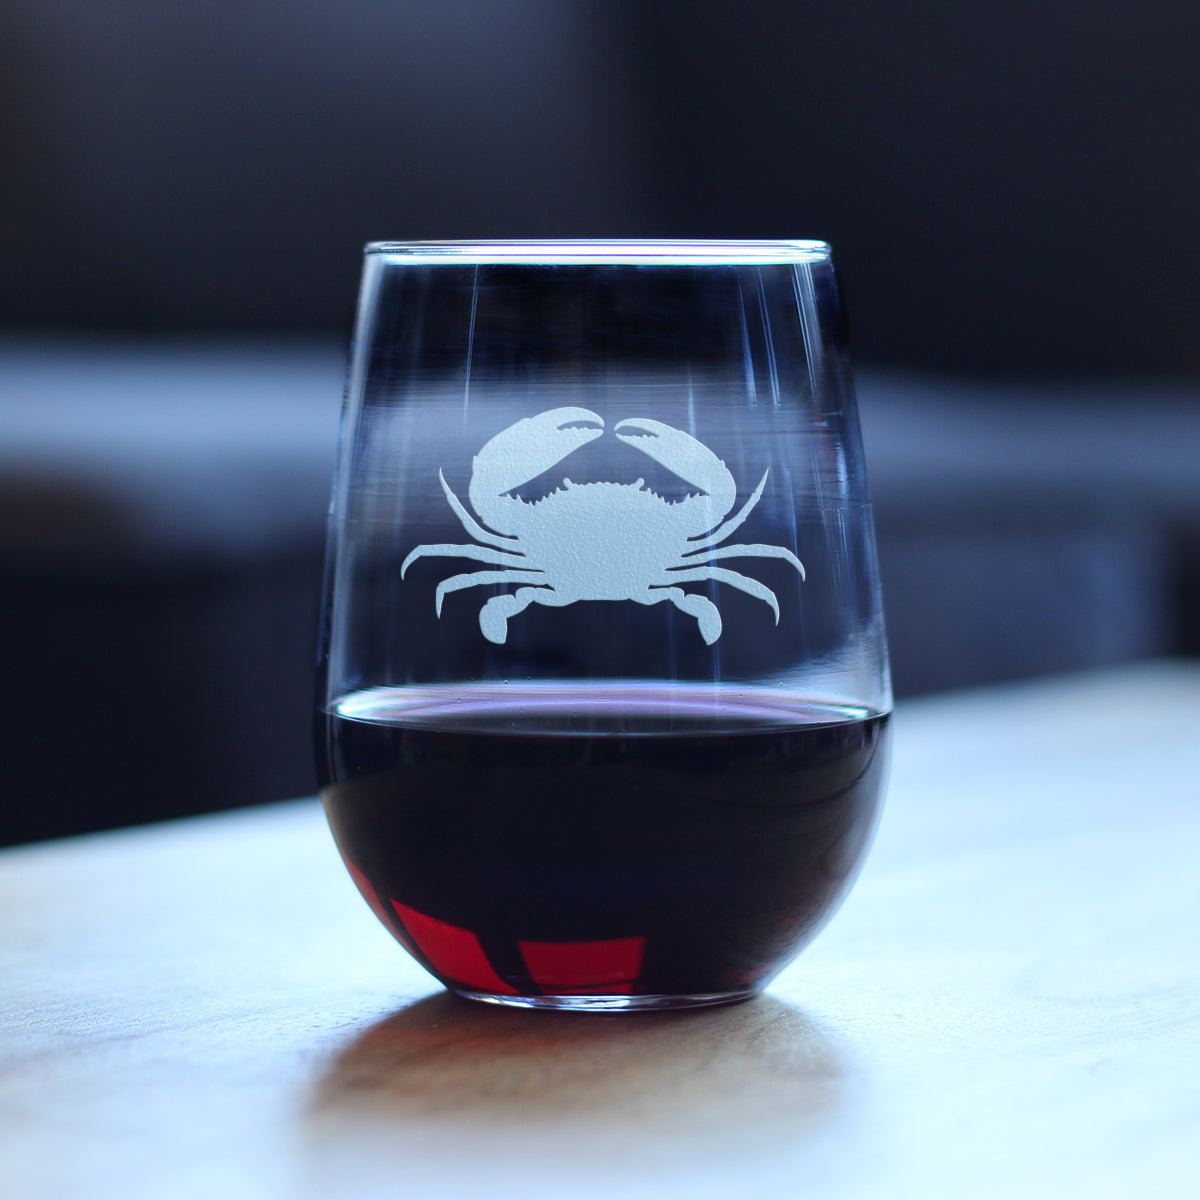 Crab - Cute Nautical Theme Gifts for Beach House - 17 Ounce Stemless Wine Glass